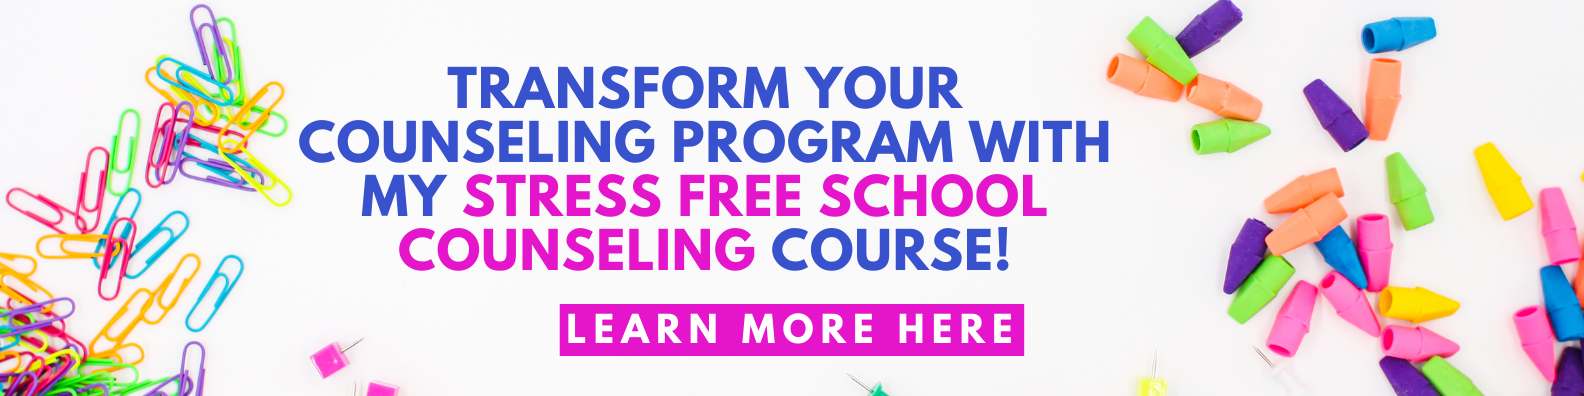 Transform Your Counseling Program with My Stress Free School Counseling Course